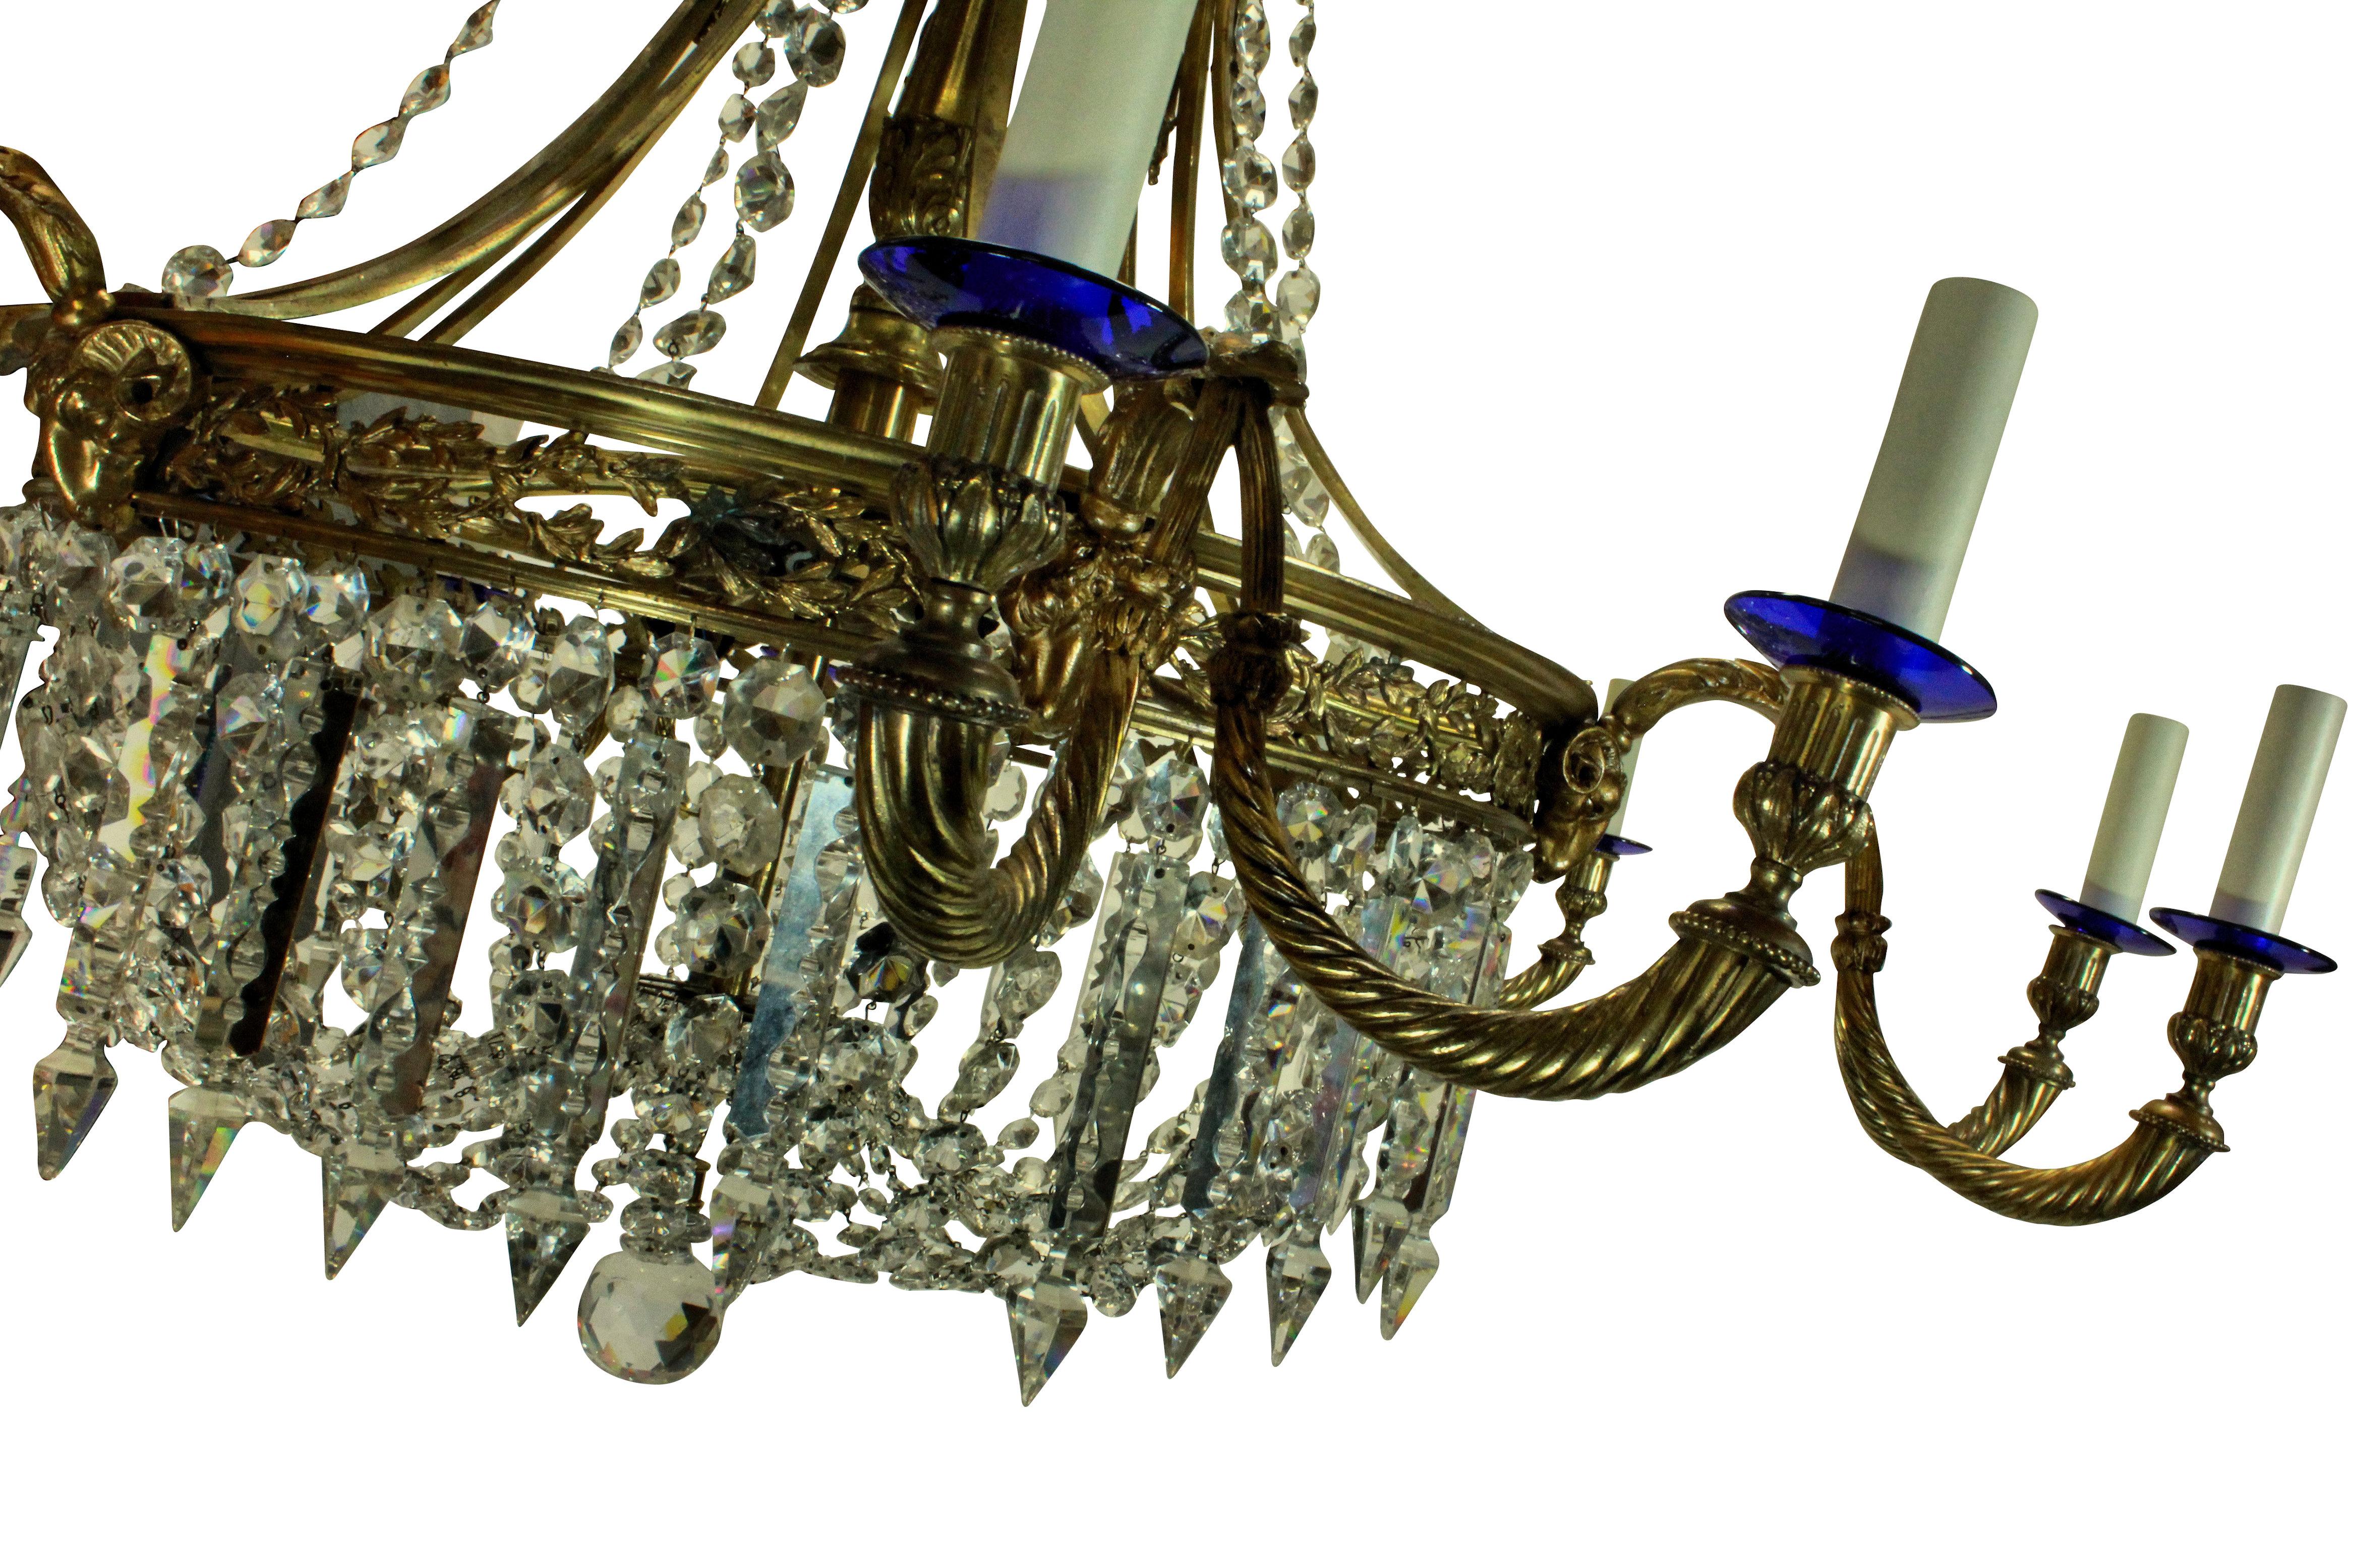 A large English Regency style gilt bronze and cut glass chandelier of fine quality. Formerly from Salperton Park, Gloucestershire.